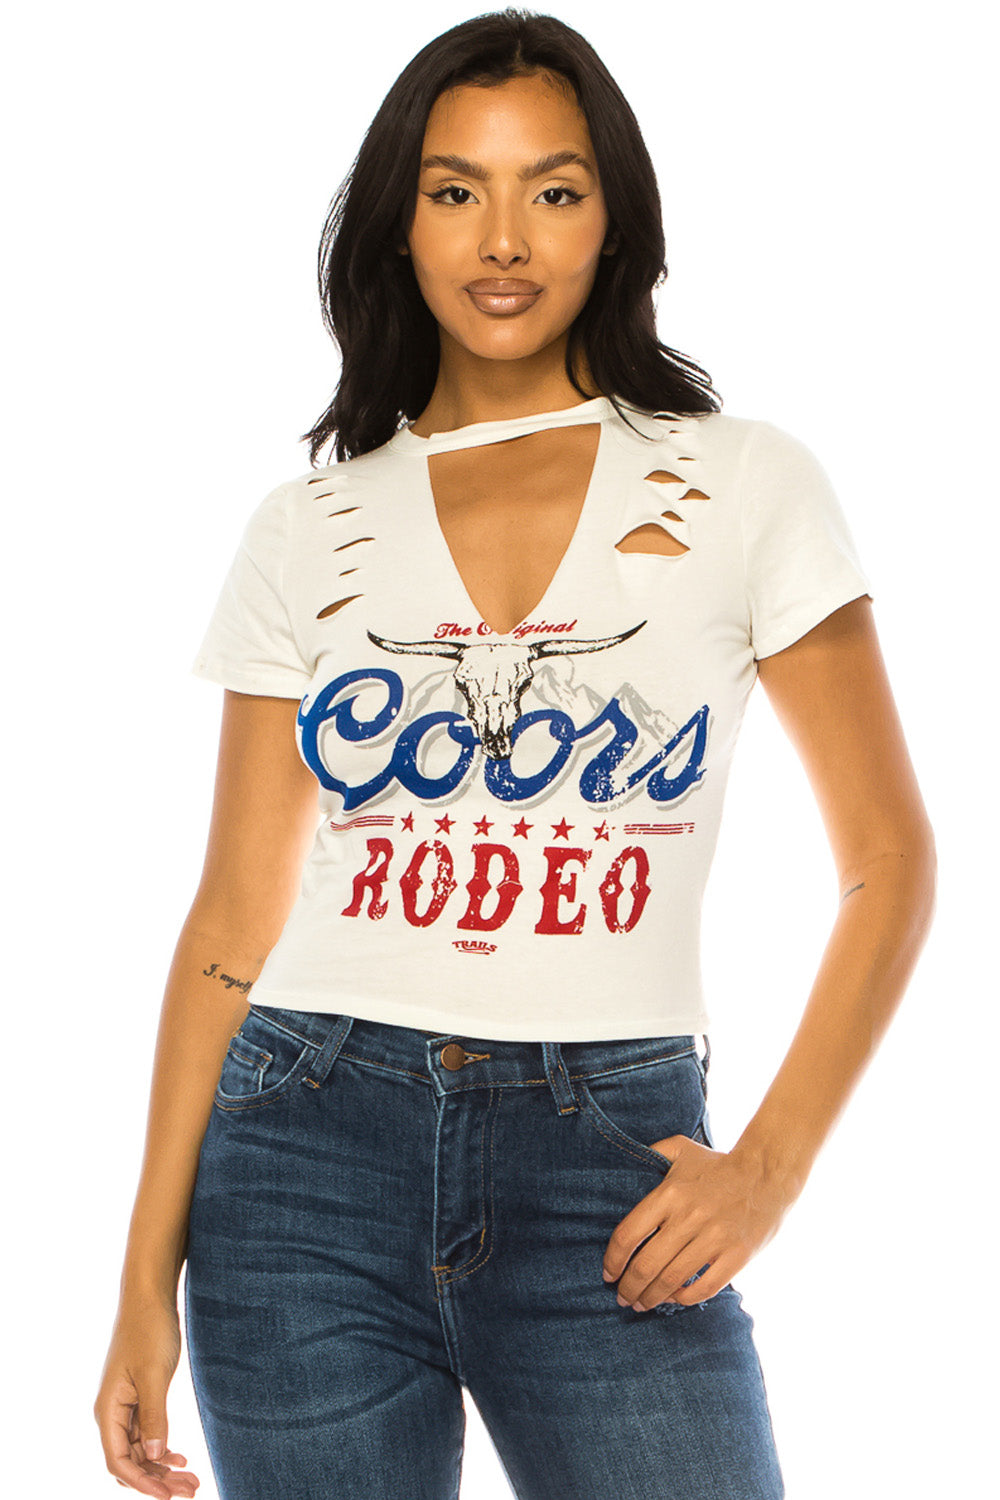 COORS RODEO SLASHED TEE - Trailsclothing.com